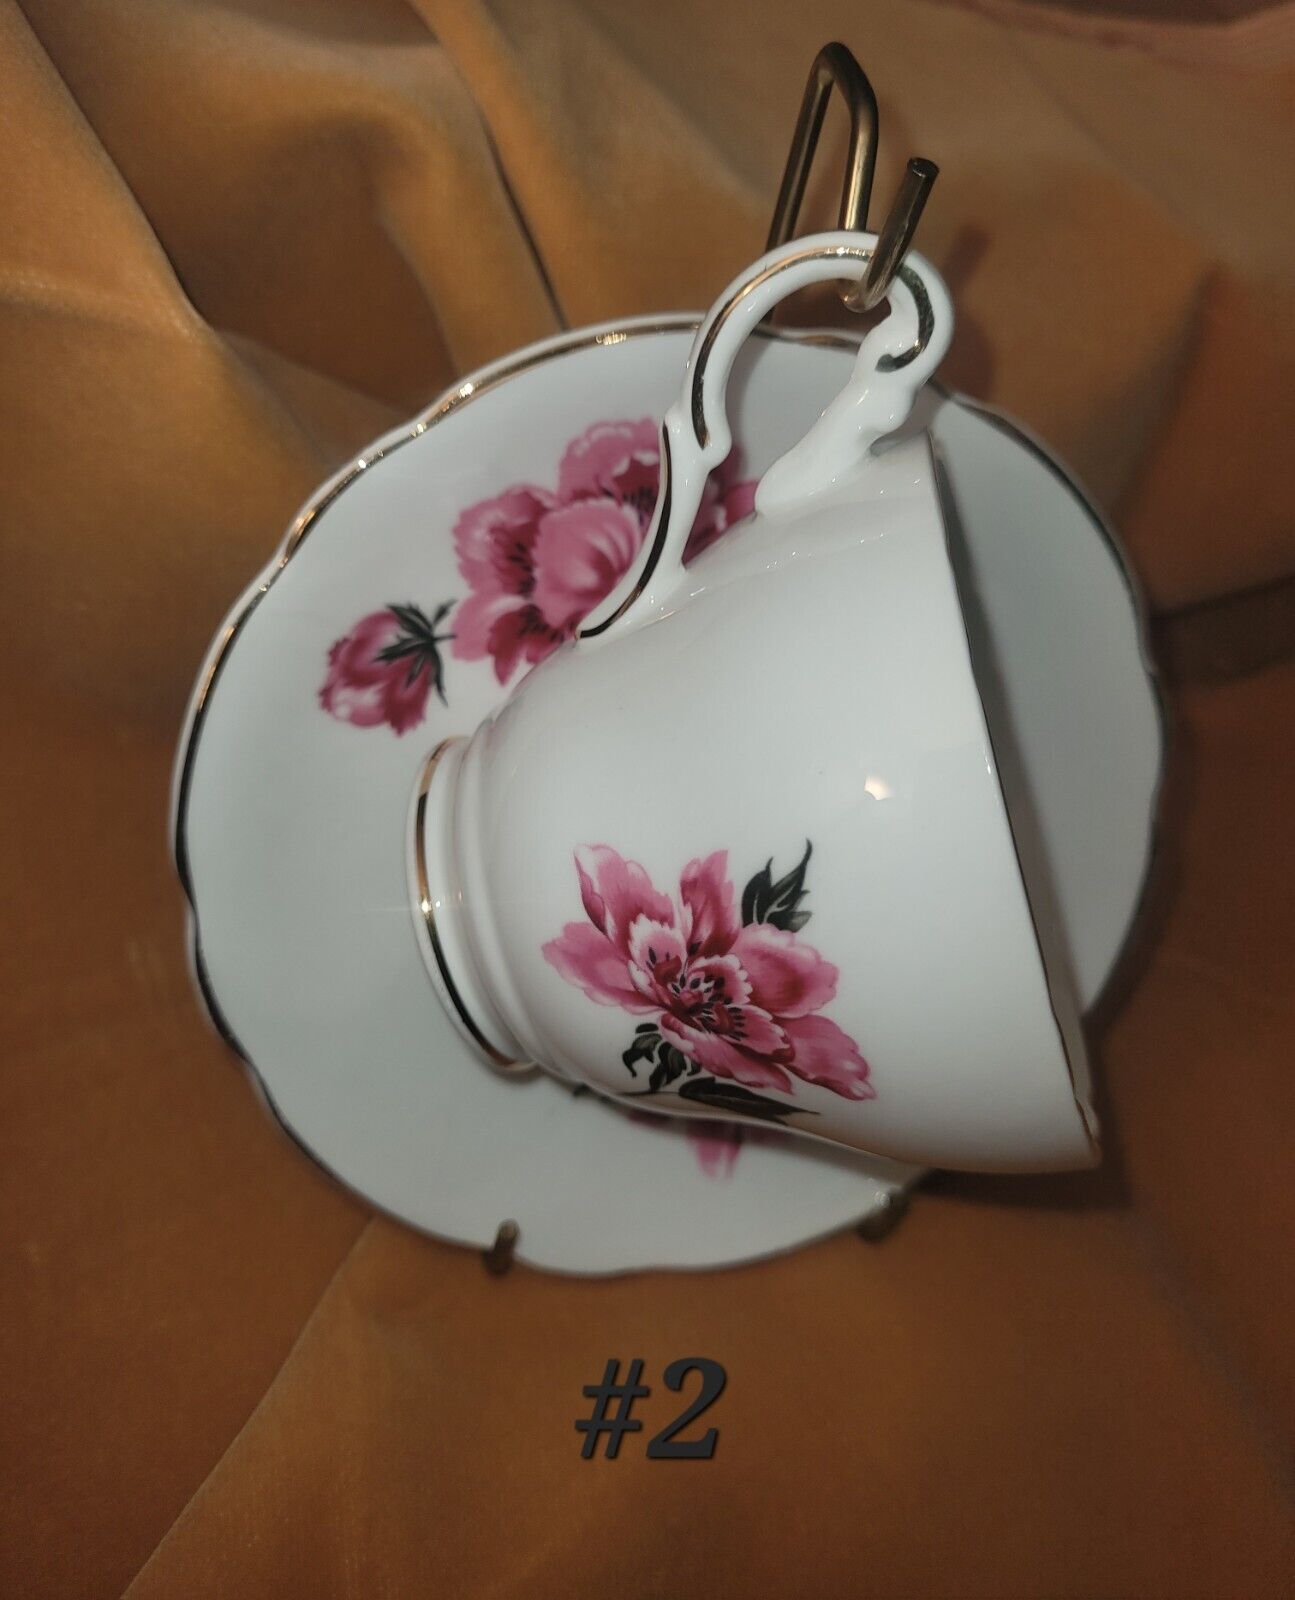 REGENCY ENGLISH Bone China Cup and Saucer Pink Flowers MADE IN ENGLAND Vintage 